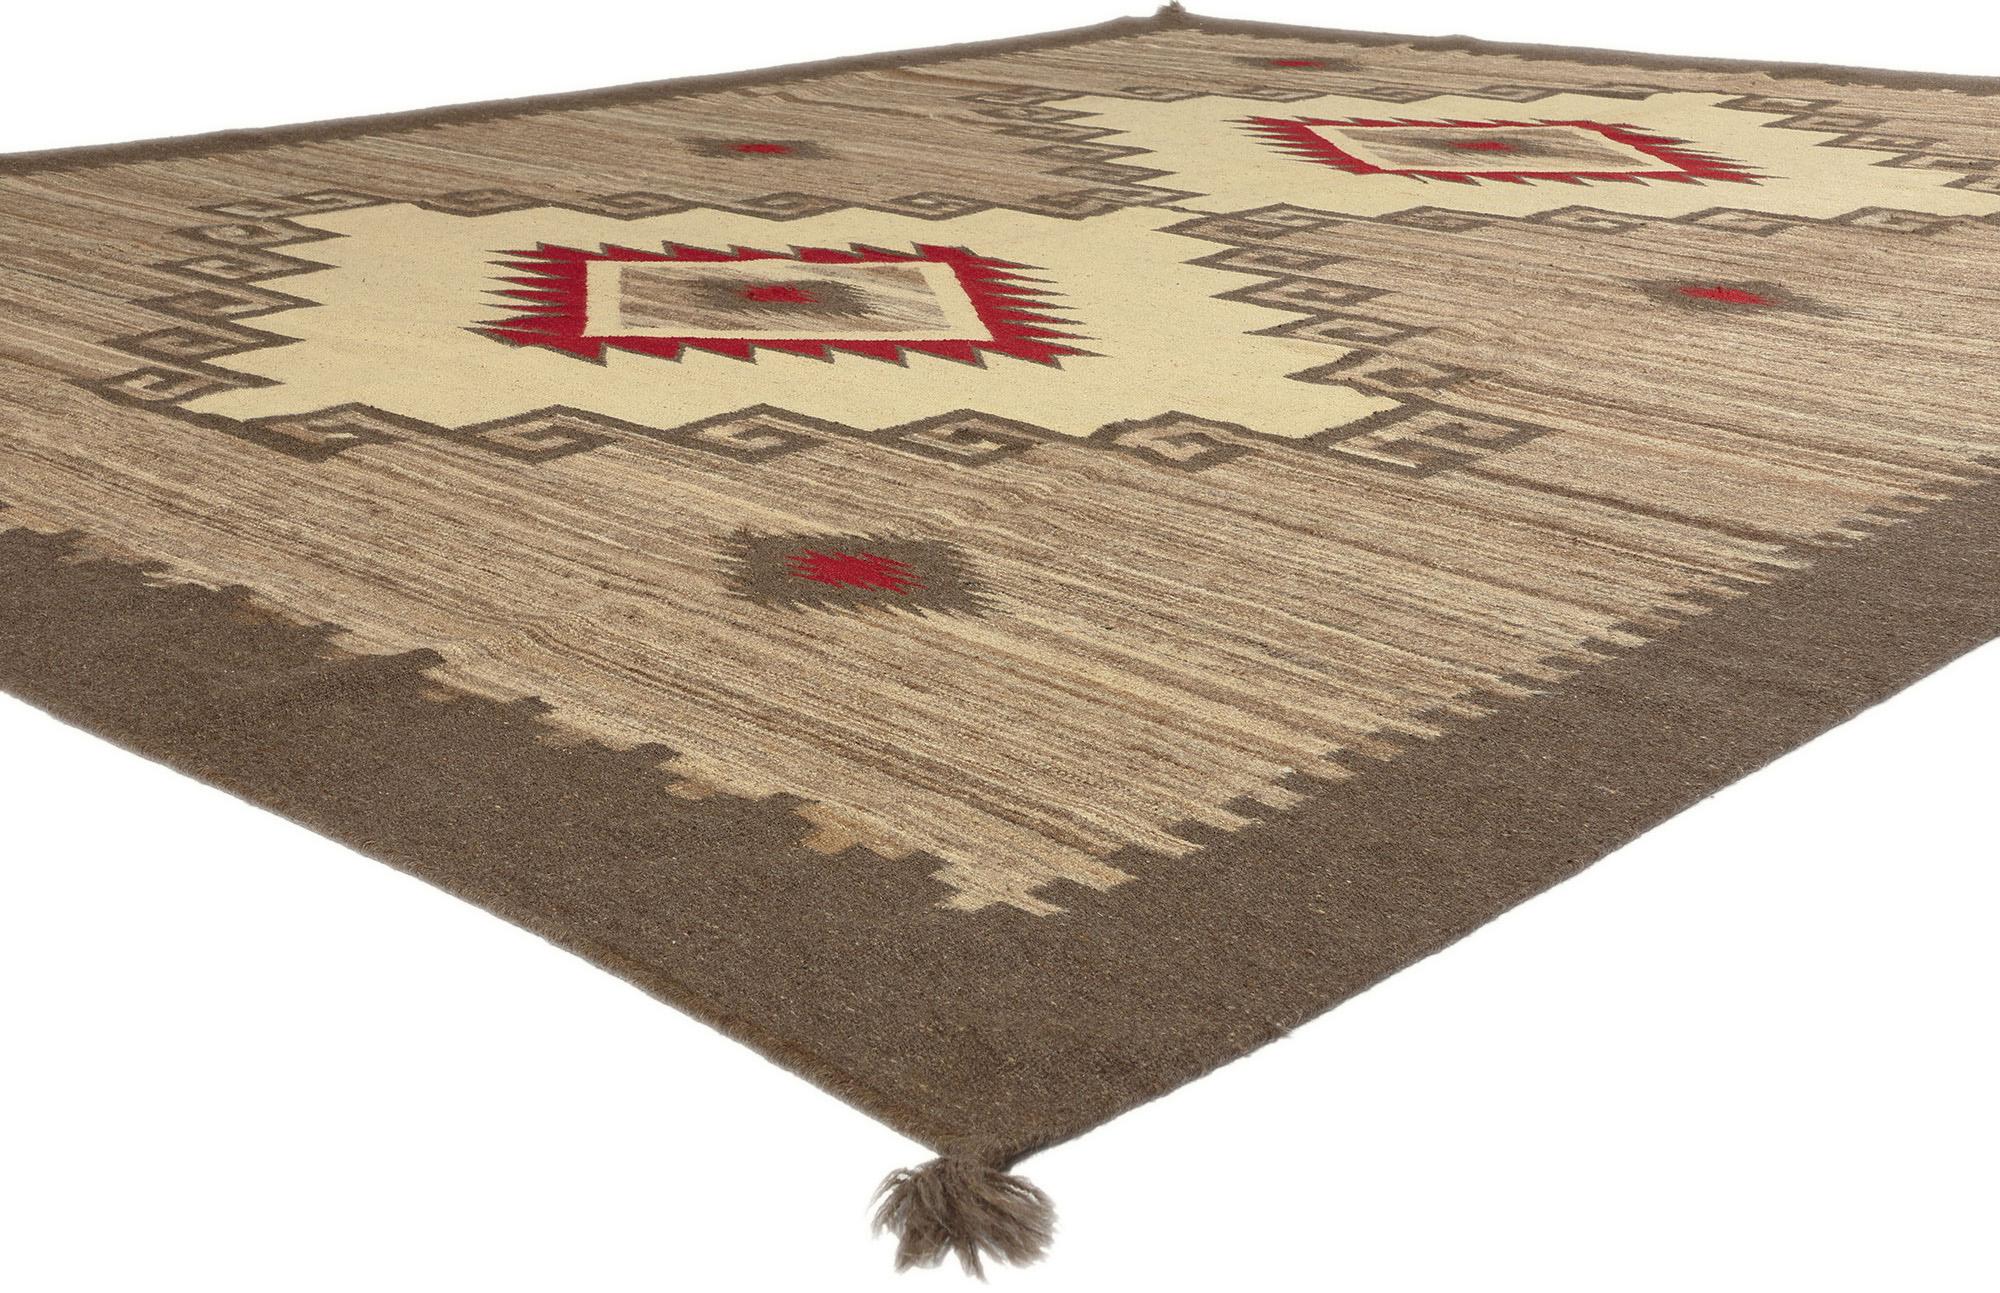 81032 Southwest Modern Ganado Navajo-Style Rug, 09'03 x 11'08. Transform your living space with the essence of Southwest Modern aesthetics embodied in this meticulously handwoven wool Ganado Navajo-style rug—an exquisite fusion of Contemporary Santa